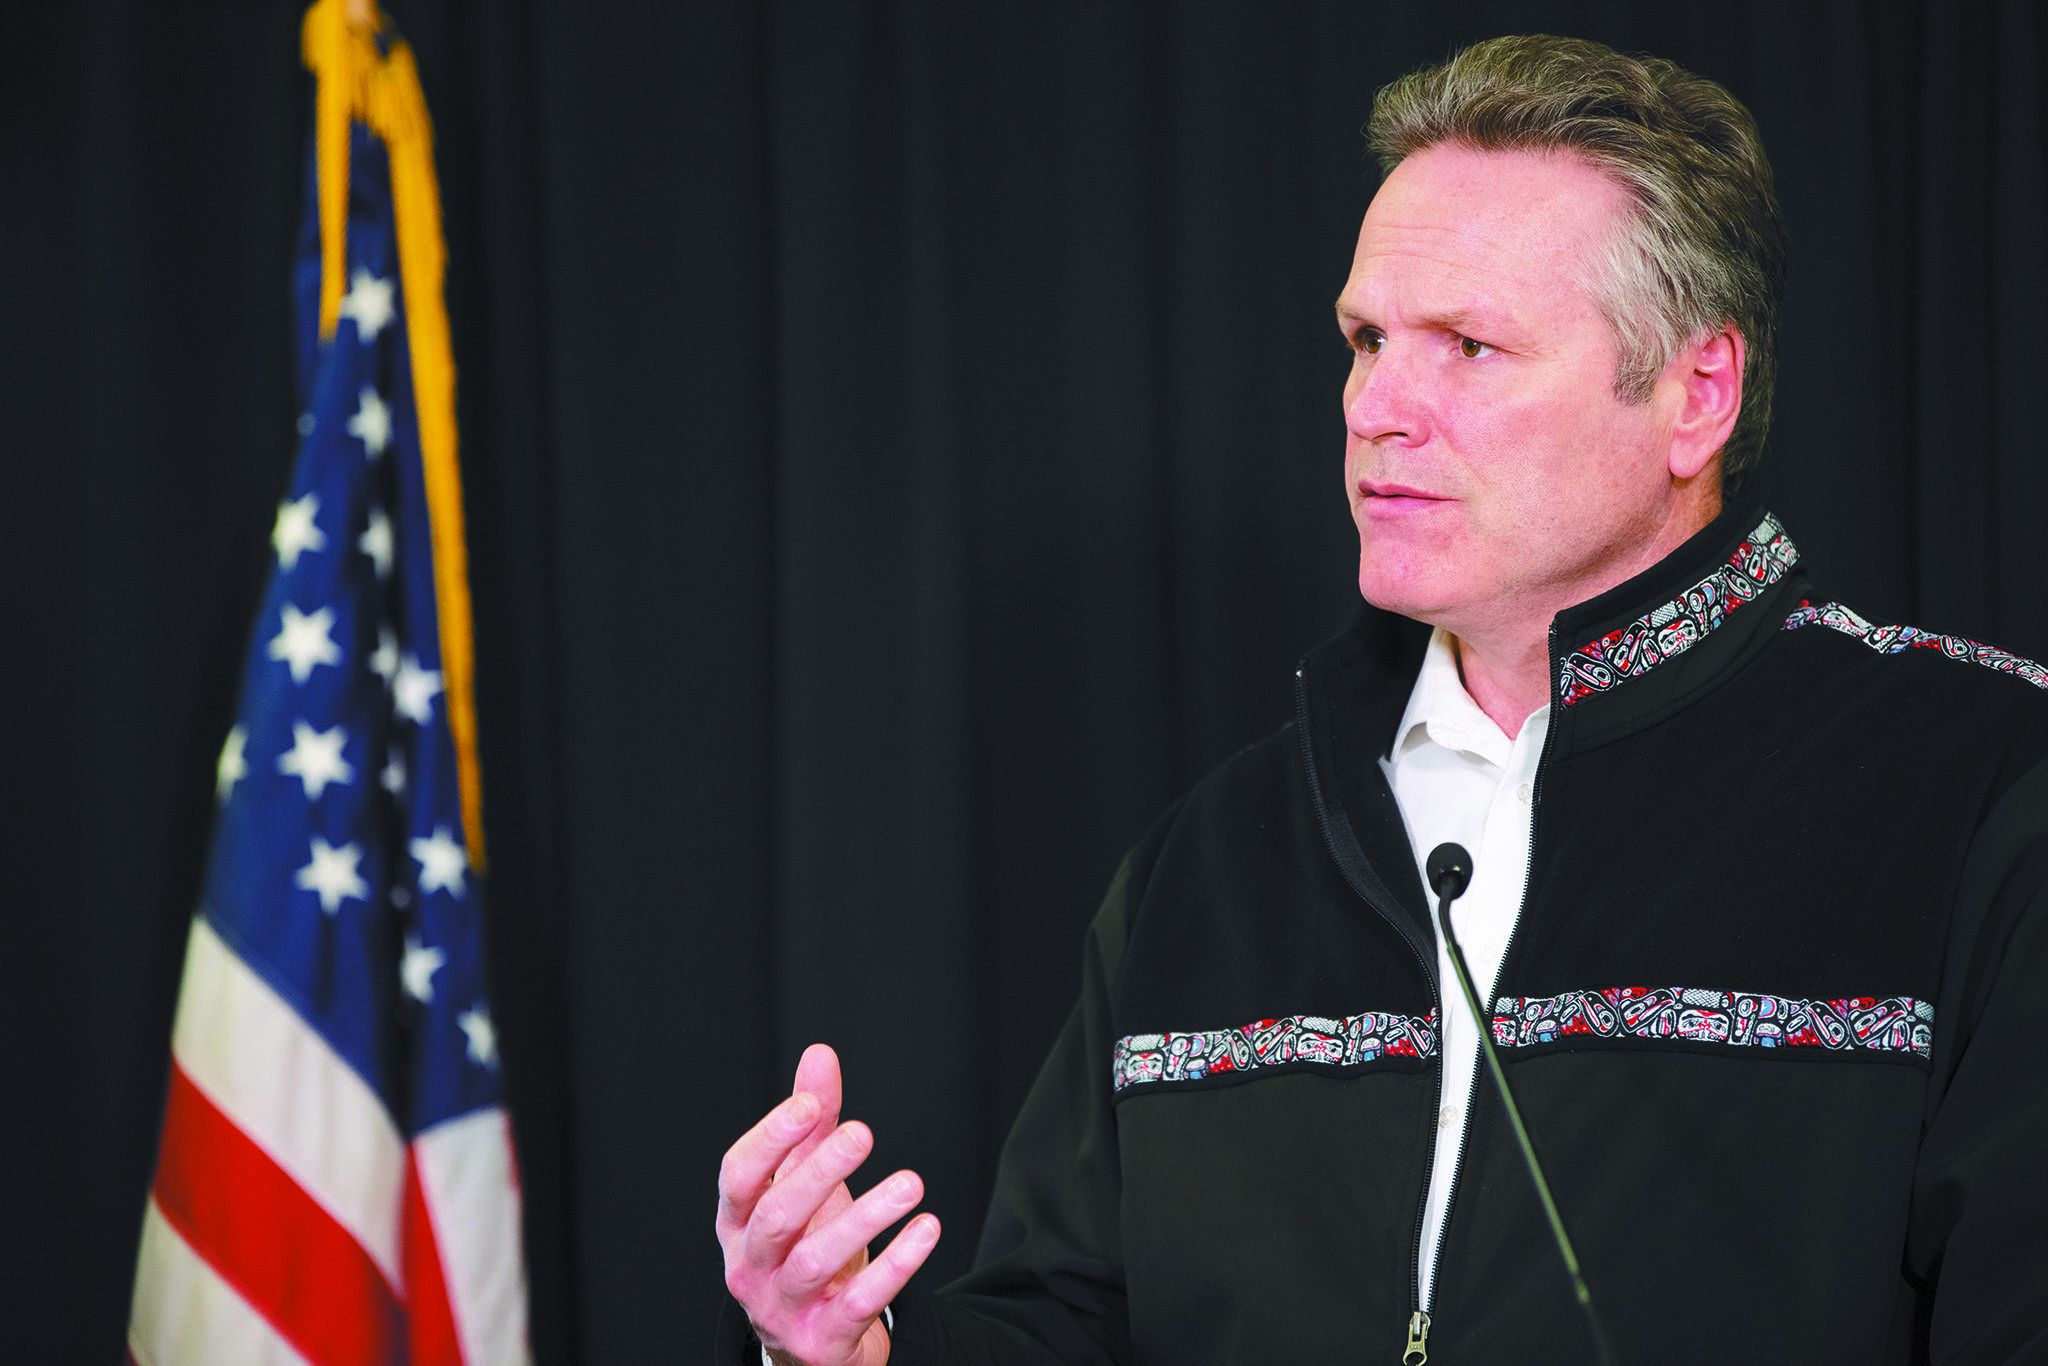 Gov. Mike Dunleavy speaks during a Thursday, April 9, 2020 press conference in the Atwood Building in Anchorage, Alaska. (Photo courtesy Office of the Governor)